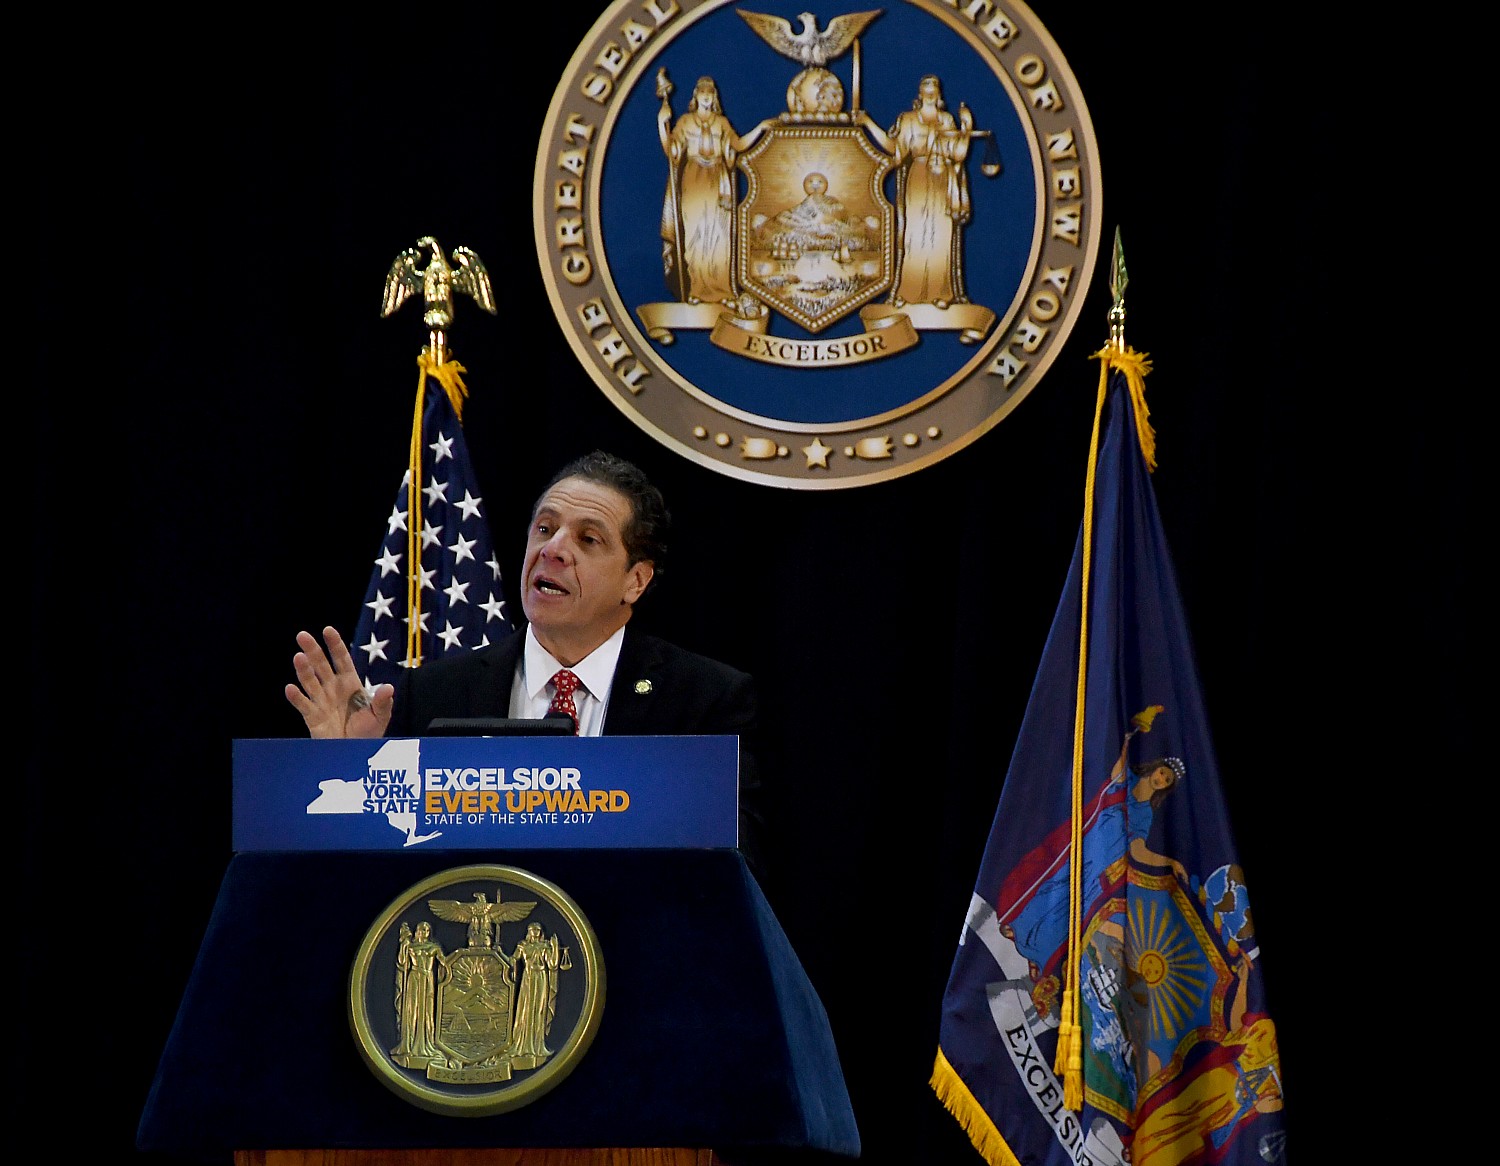 New York State Governor Andrew Cuomo in his State of the State address at SUNY Farmingdale, Long Island says the ultimate goal is generating 100% of the state’s energy needs from renewable sources © 2017 Karen Rubin/news-photos-features.com